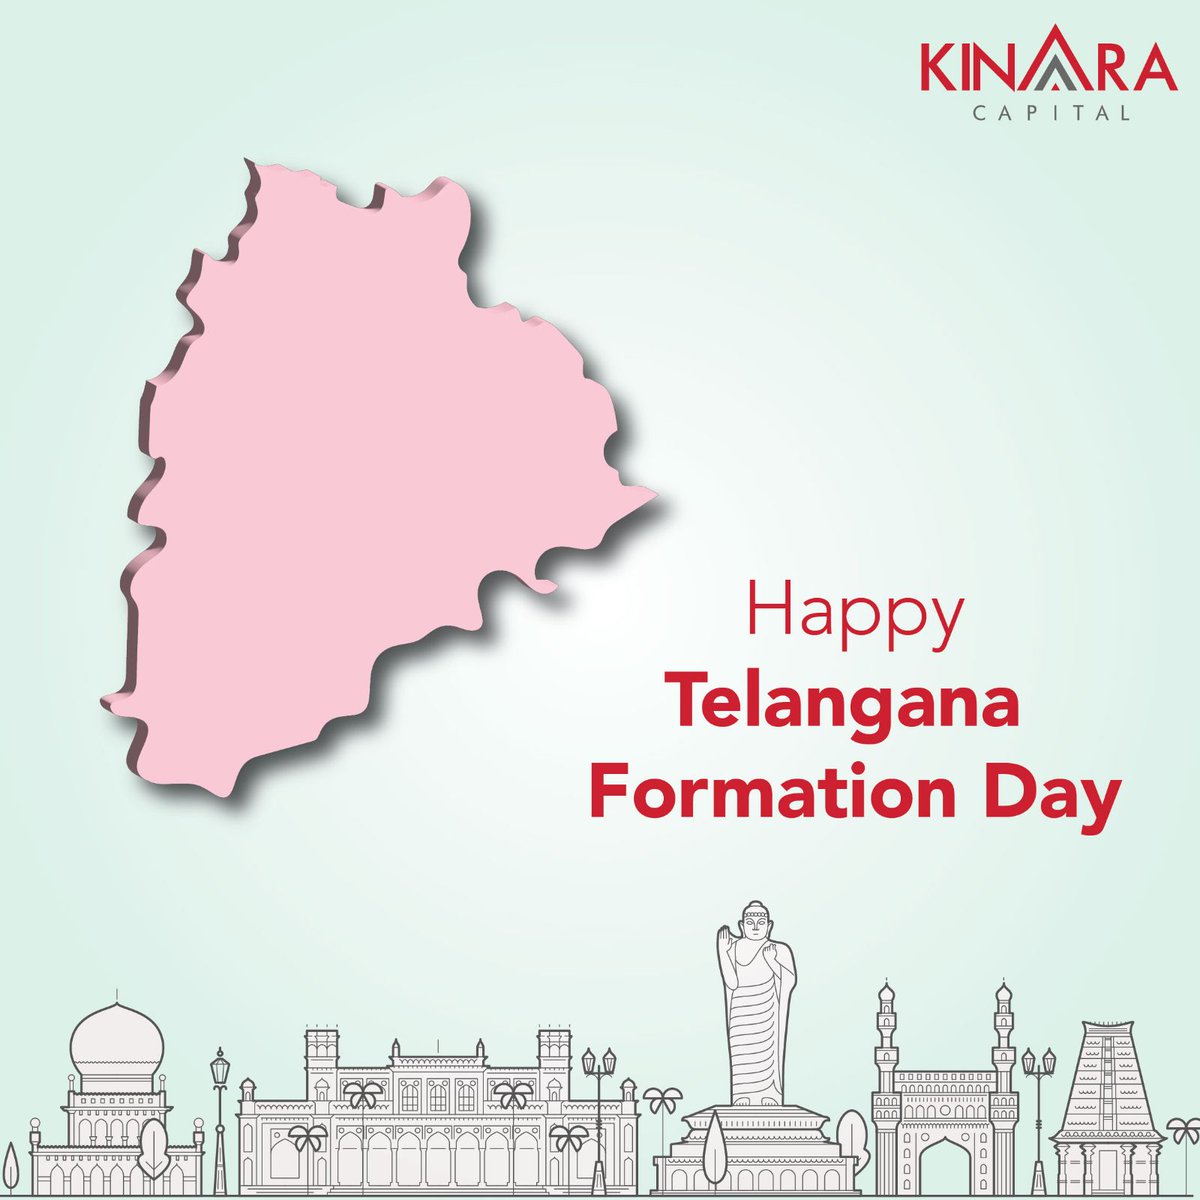 On the occasion of #TelanganaFormationDay2023, some of our #DivisionalHeads share a message to celebrate the youngest #state in #India, which is home to 2.6 million #MSMEs.

Wishing you all a happy #TelanganaFormationDay!

#TelanganaPride #KinaraCapital #TeamKinara